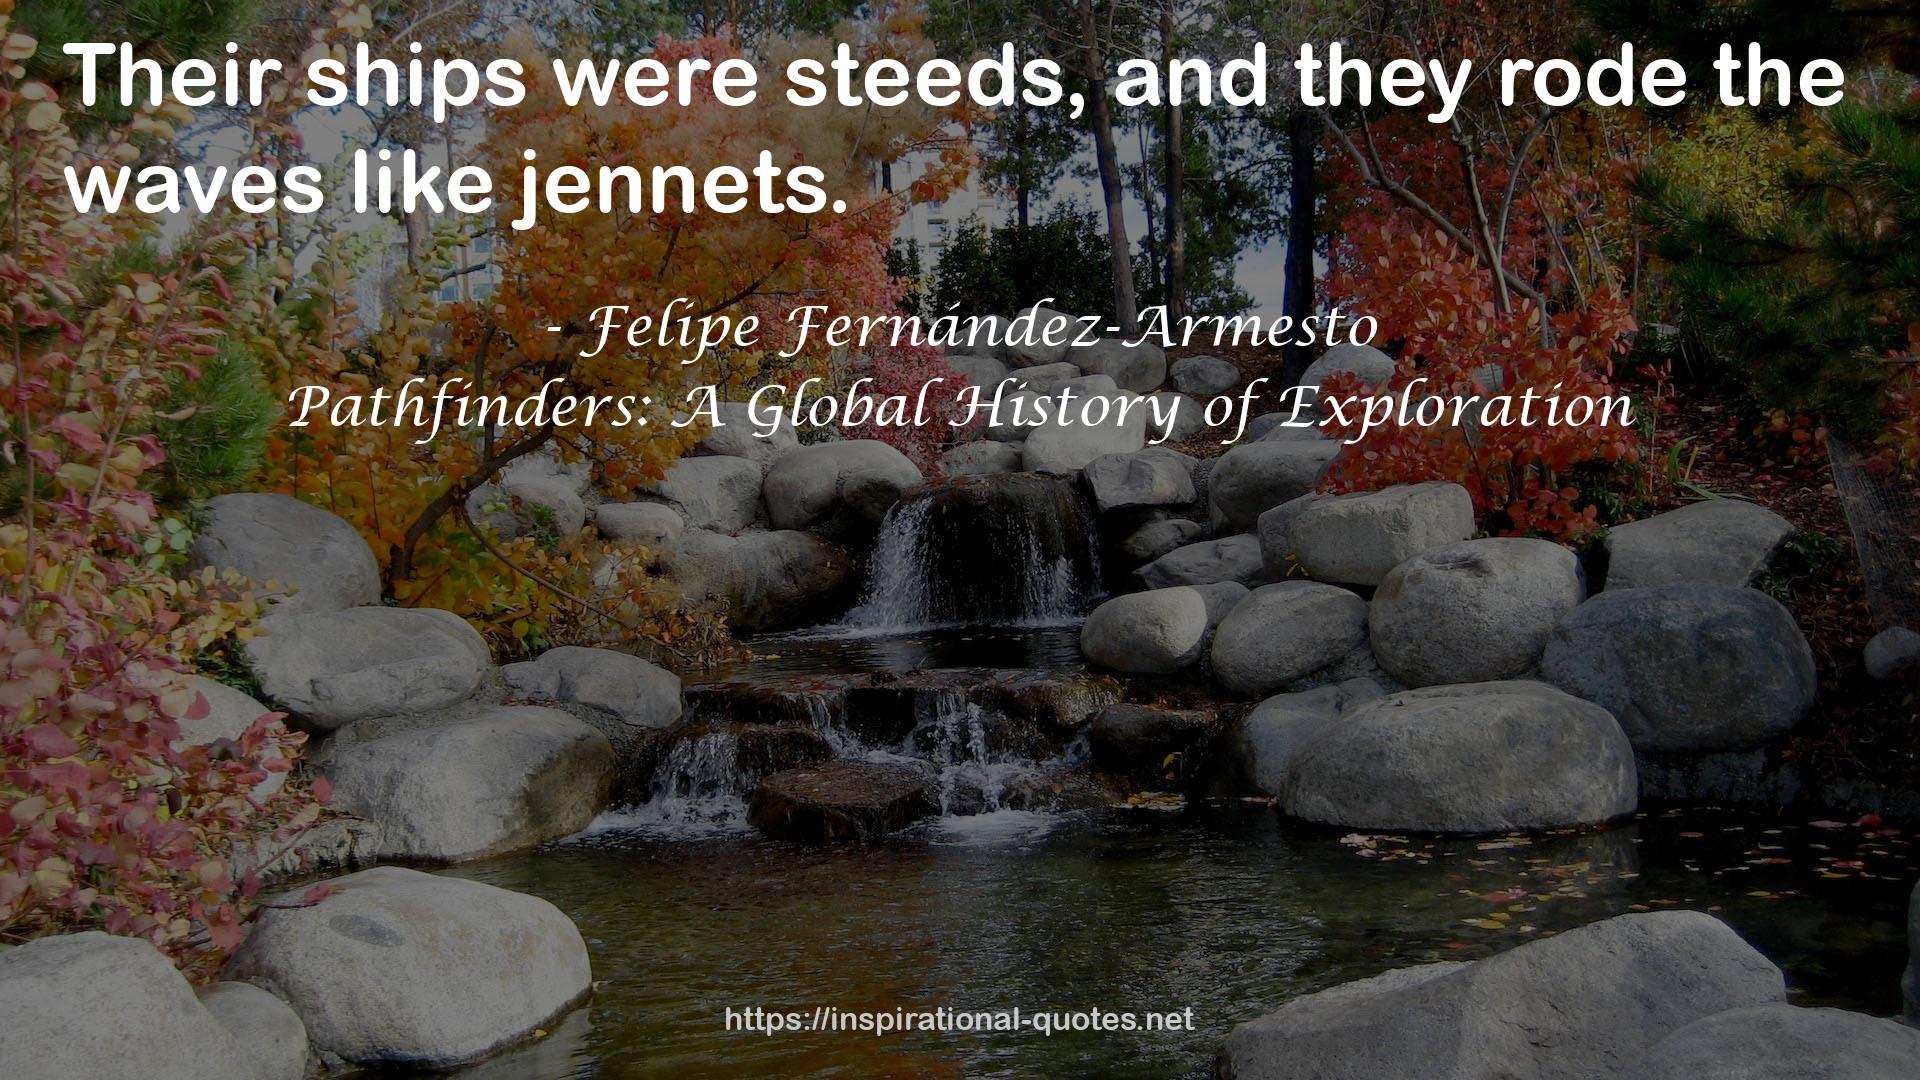 Pathfinders: A Global History of Exploration QUOTES